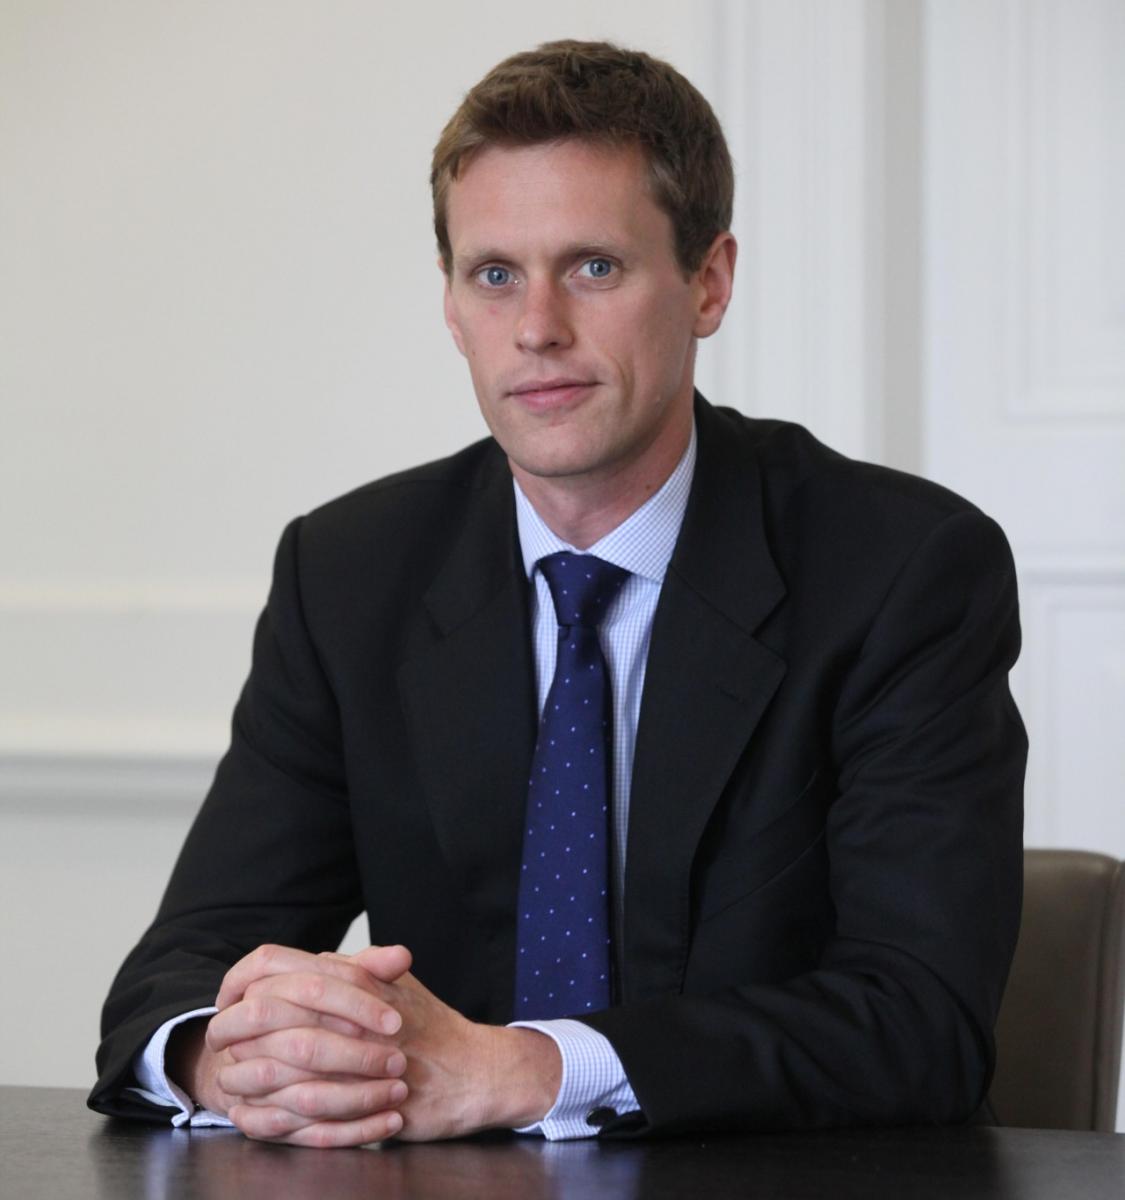 Alastair Laing is a corporate partner at Forsters LLP.